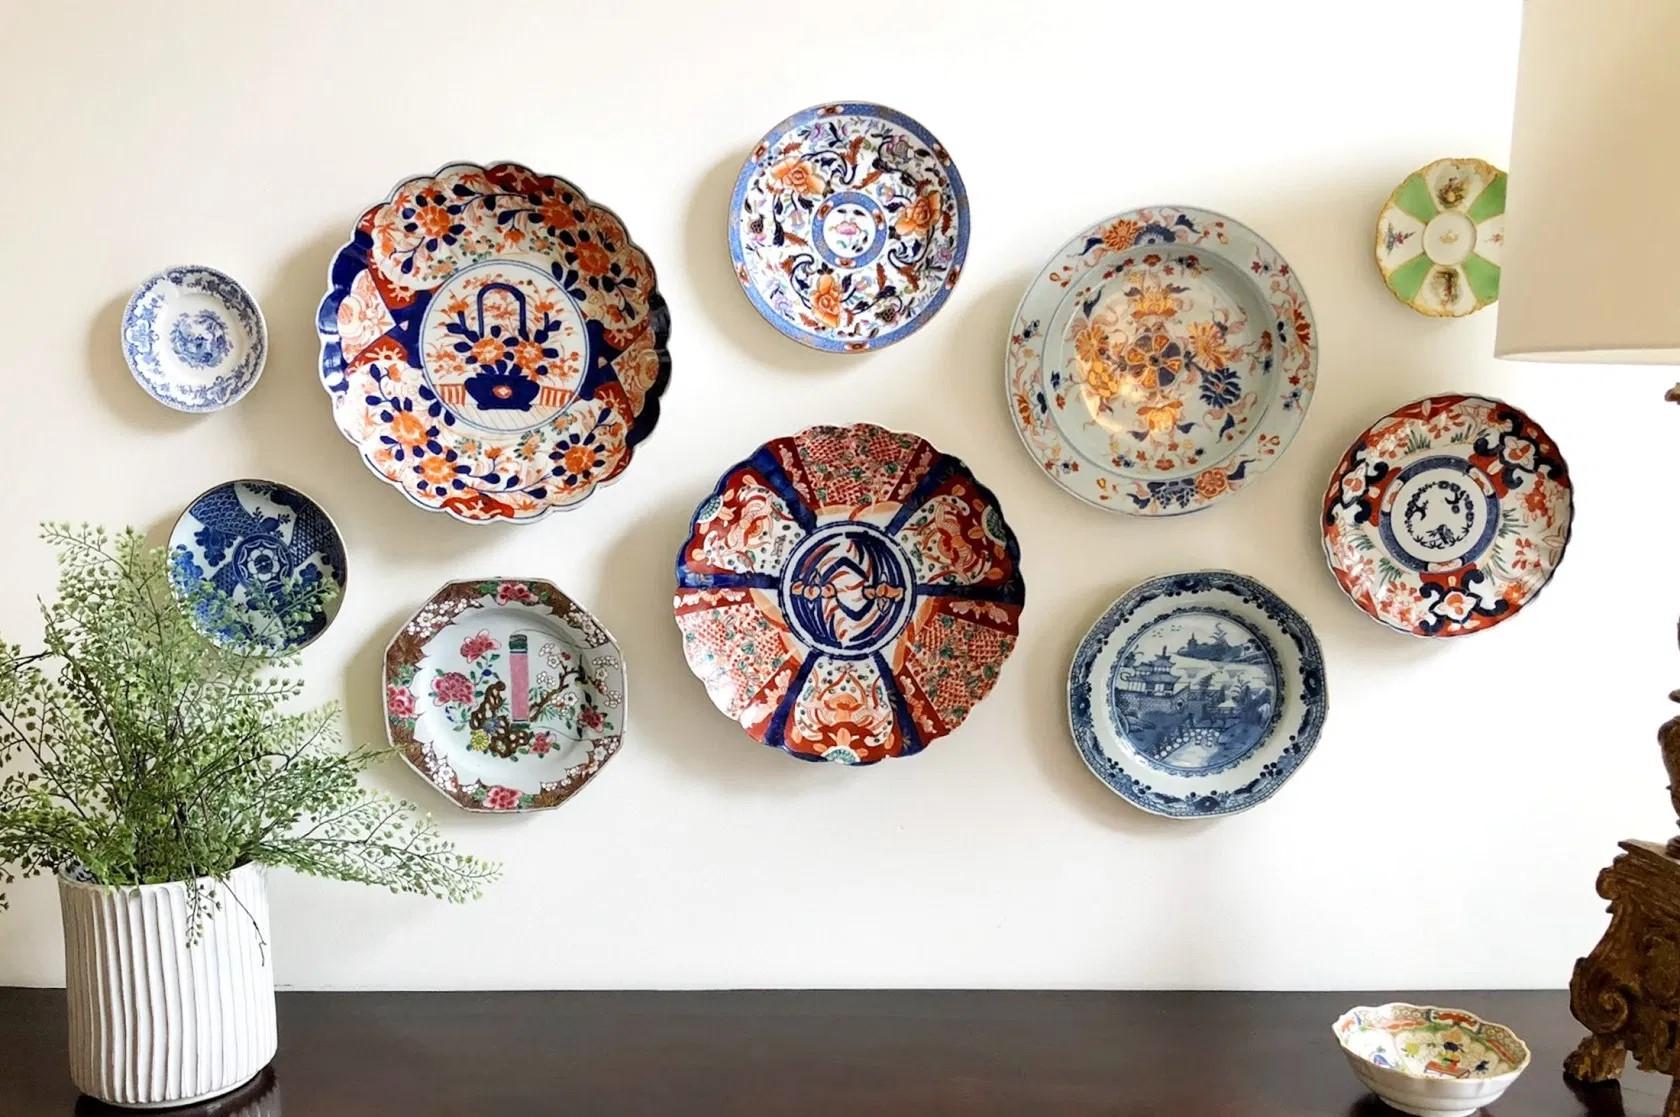 Perfect for interior wall decoration. We offer sets of 18th-19th century Chinese/Japanese Imari plates in different sizes. Available in every quantity needed. The selection in the pictures might not be available due to stock changes.
Prices on